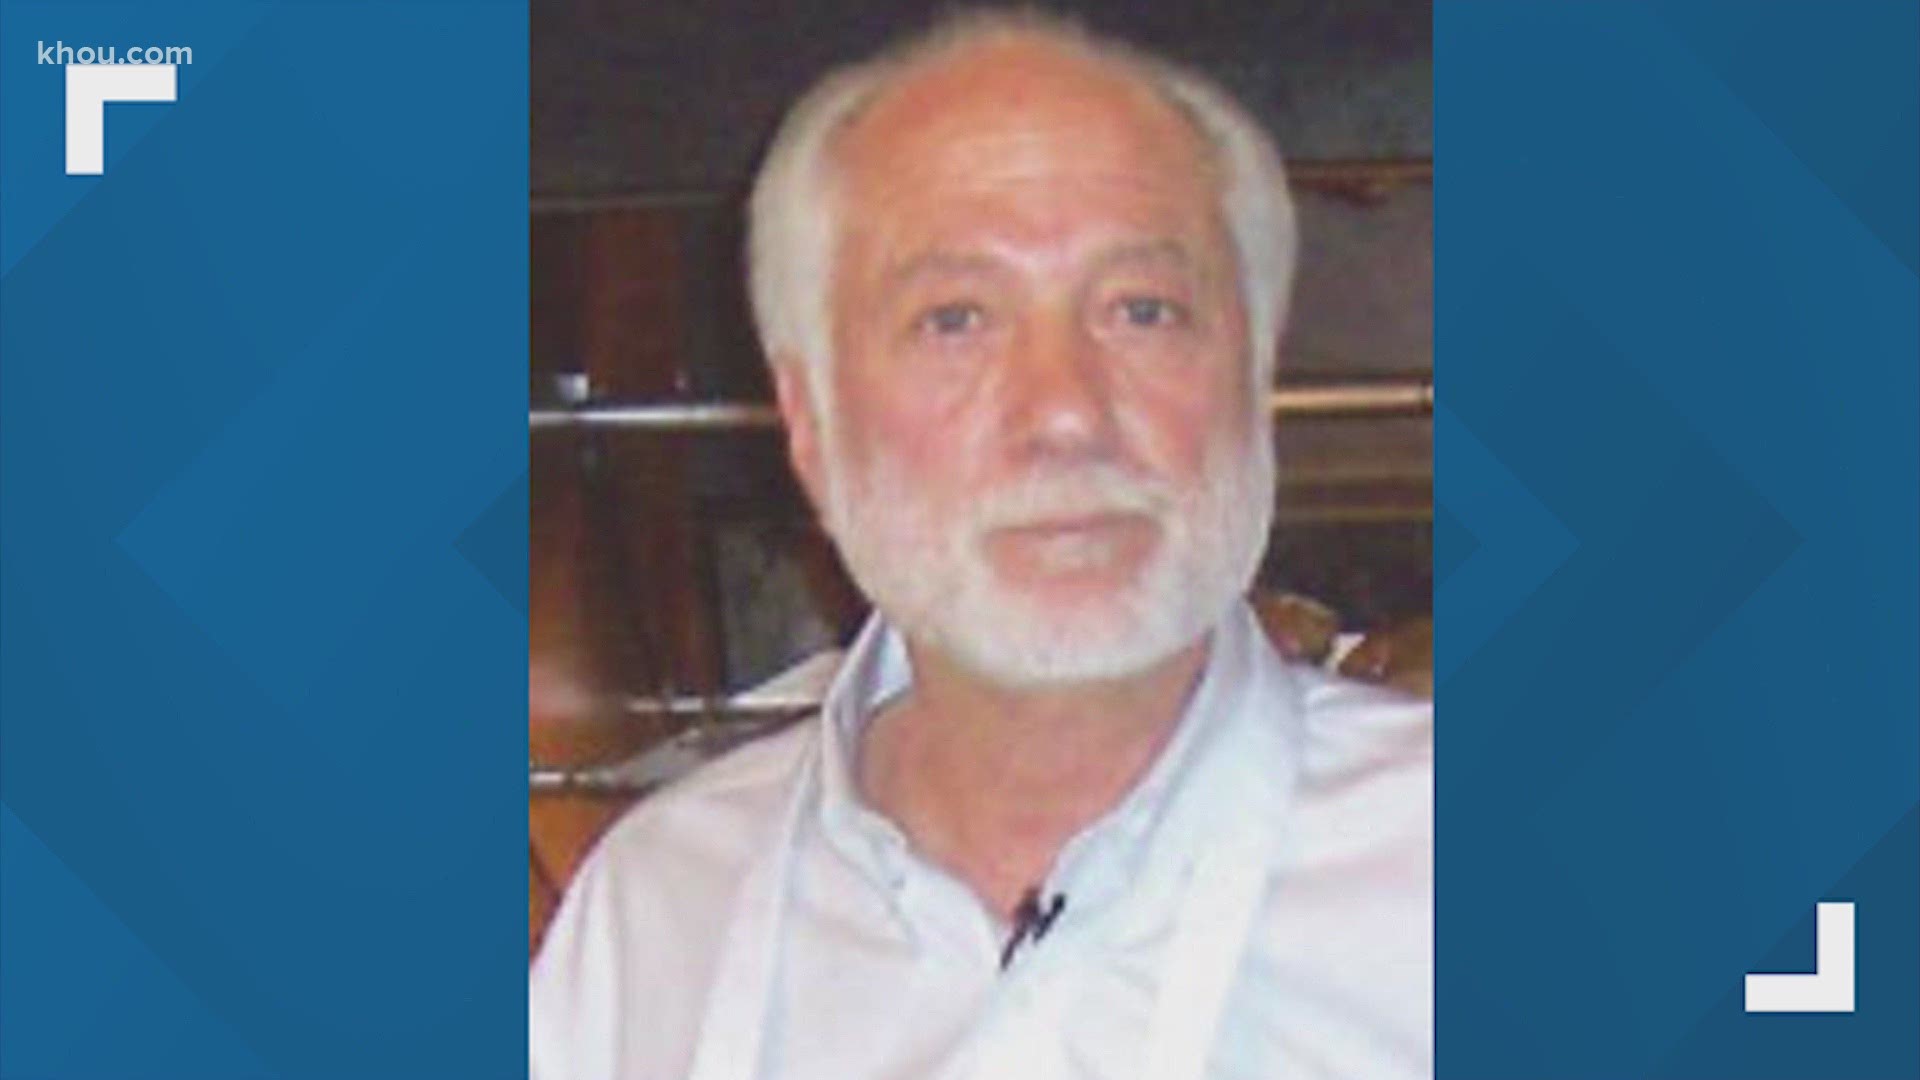 Family members announced Mandola had died early Sunday due to causes related to the coronavirus. He was 77.